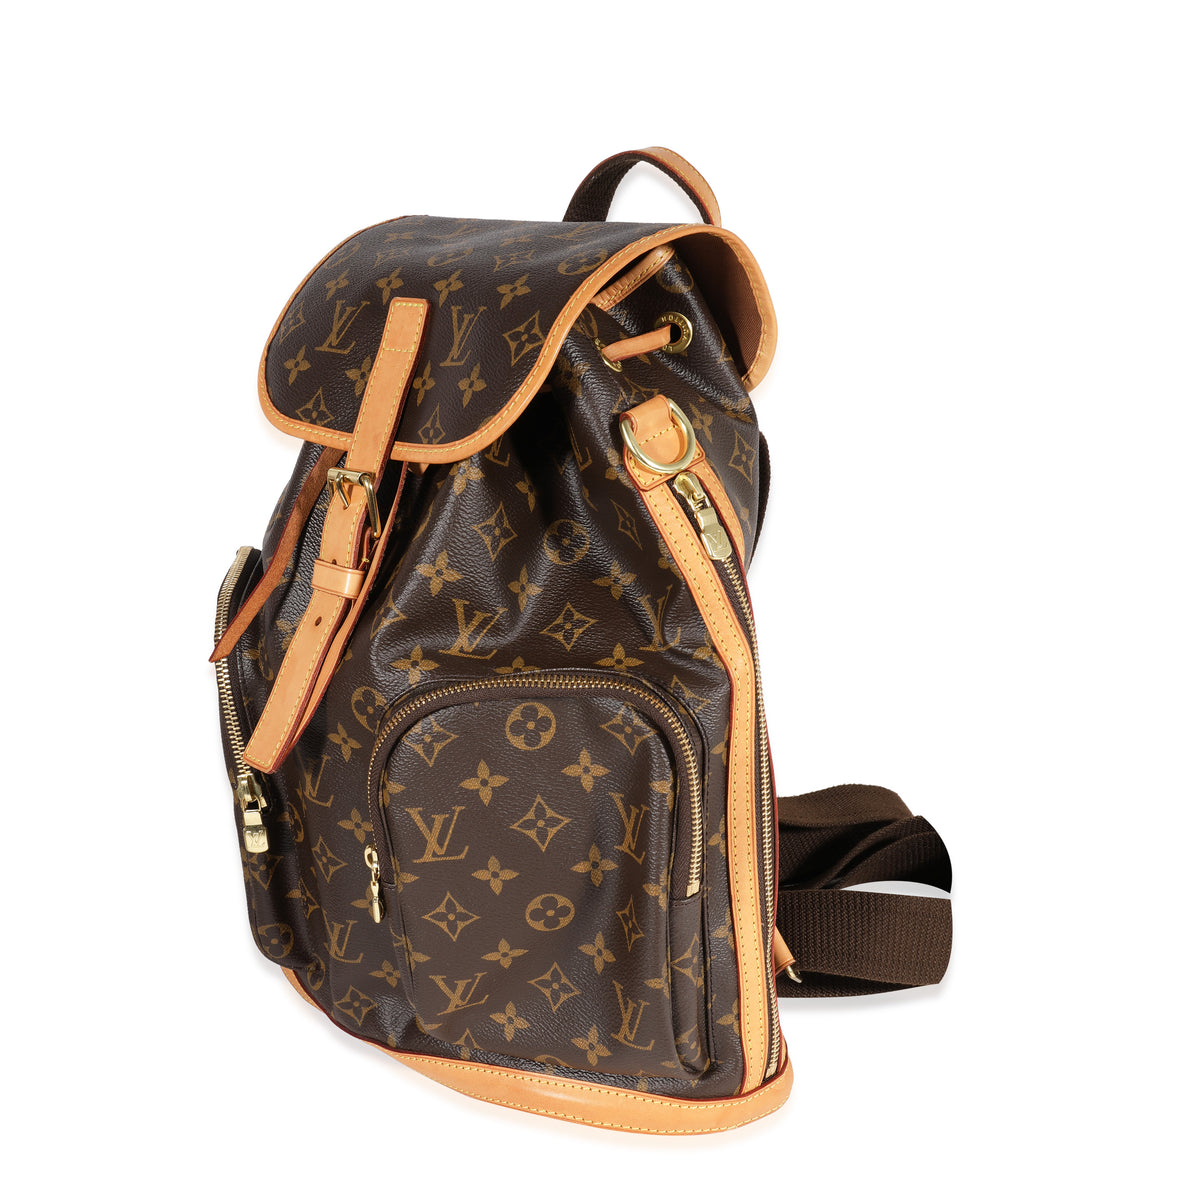 louis vuitton bosphore backpack - Google Search